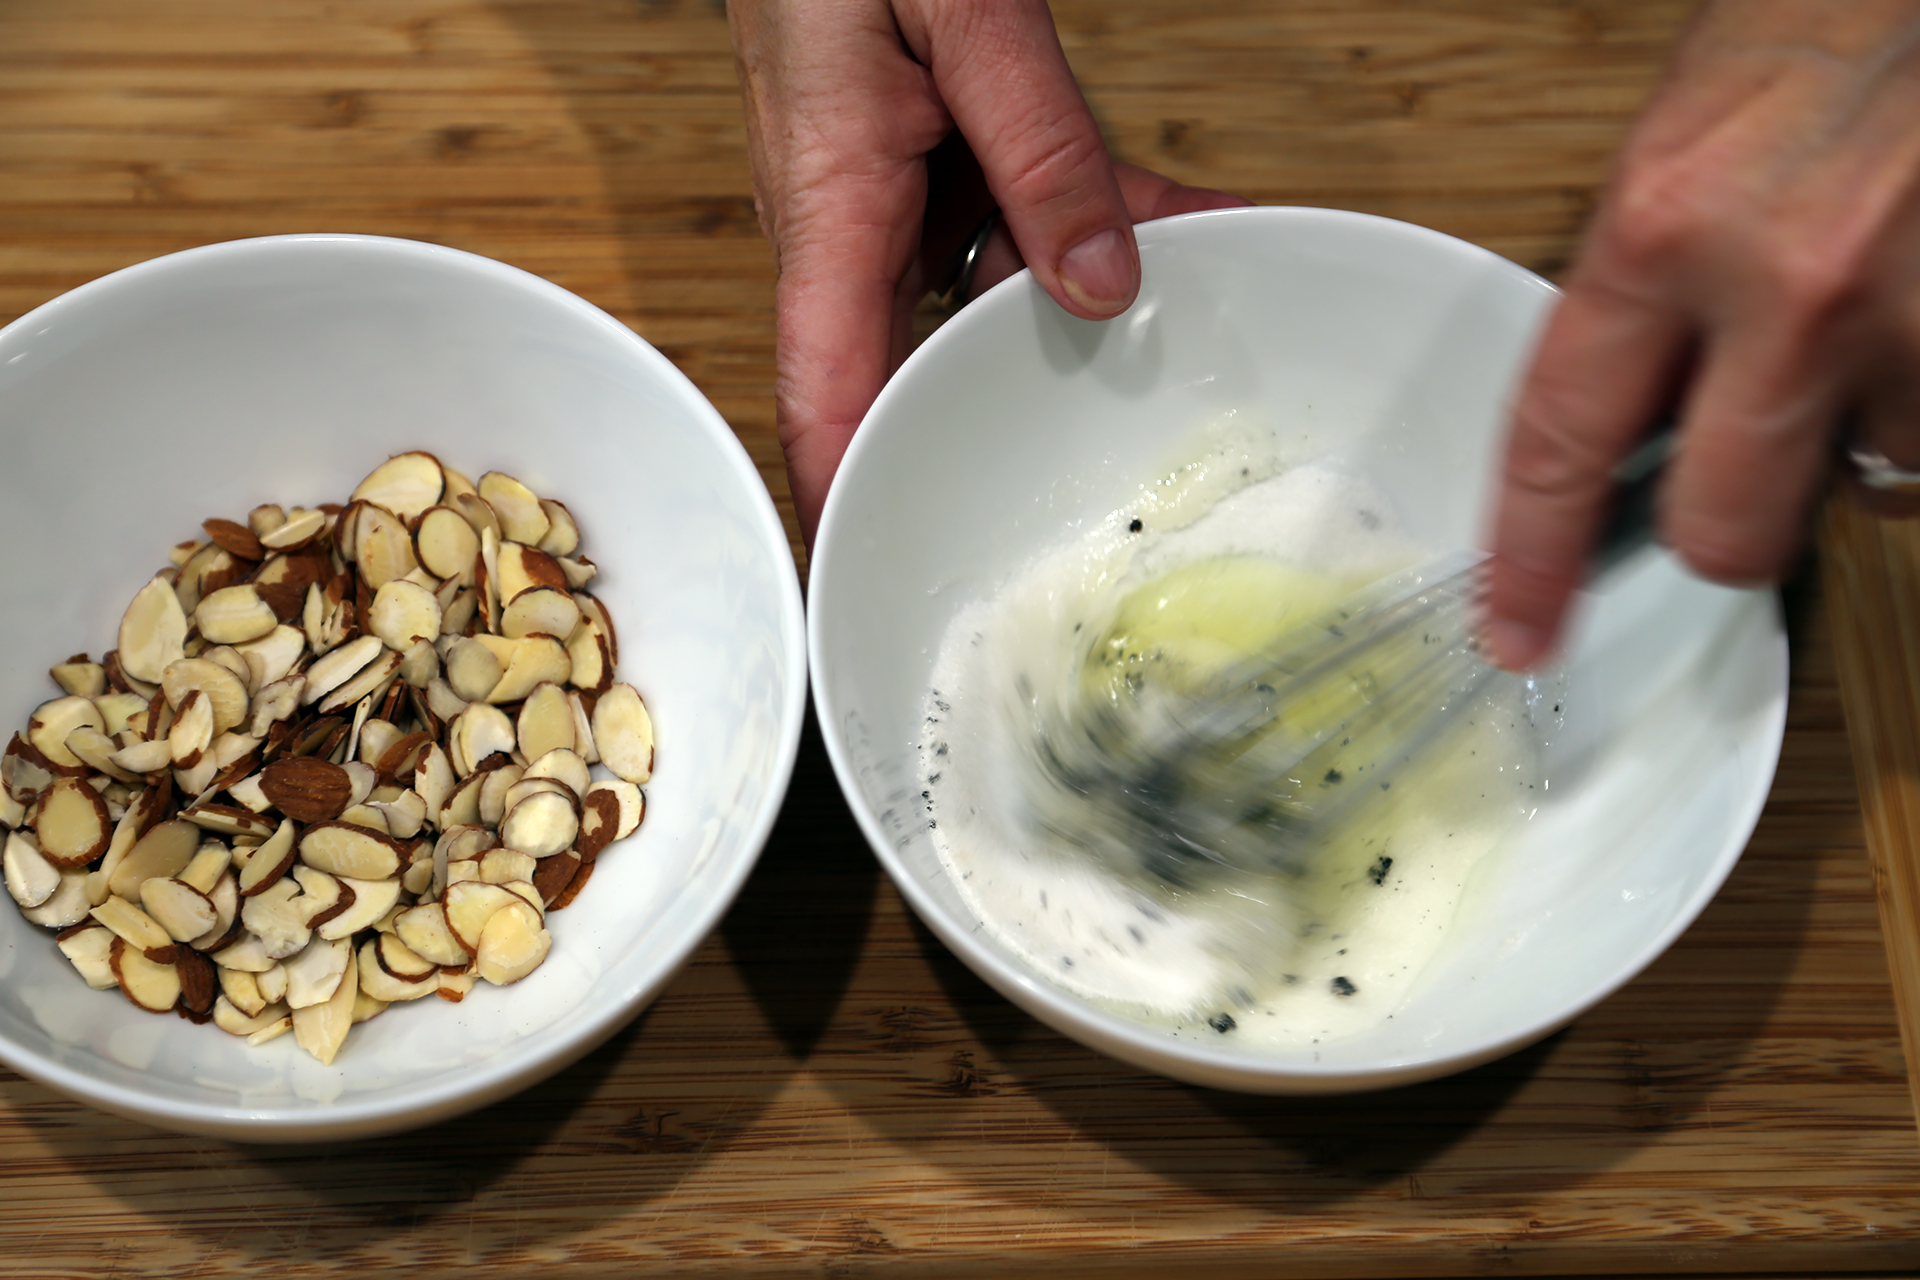 To make the almond crackle, add the egg white, sugar, and salt to the bowl with the vanilla bean seeds and whisk just until frothy (you aren’t actually whipping the whites, you are simply breaking them up) and the vanilla seeds are evenly dispersed.